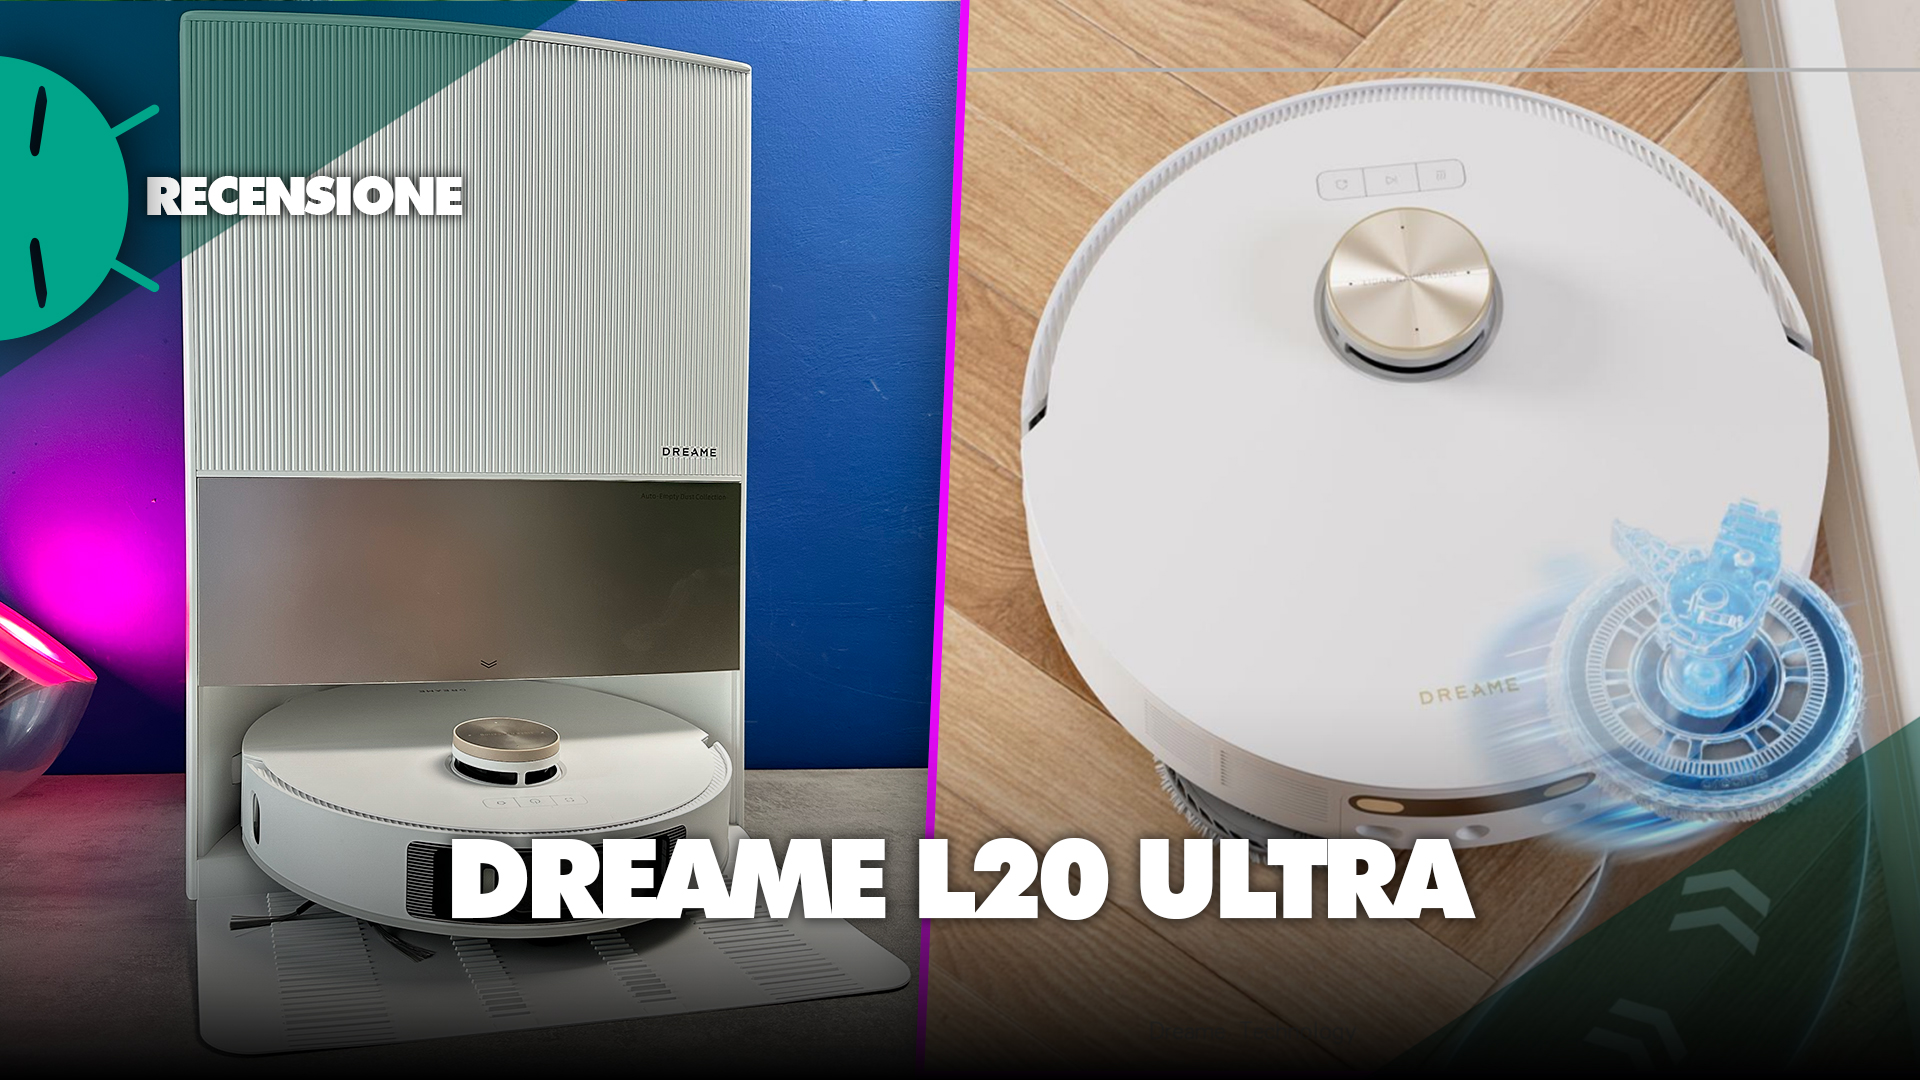 DreameBot L20 Ultra has recognized as Best of IFA with numerous